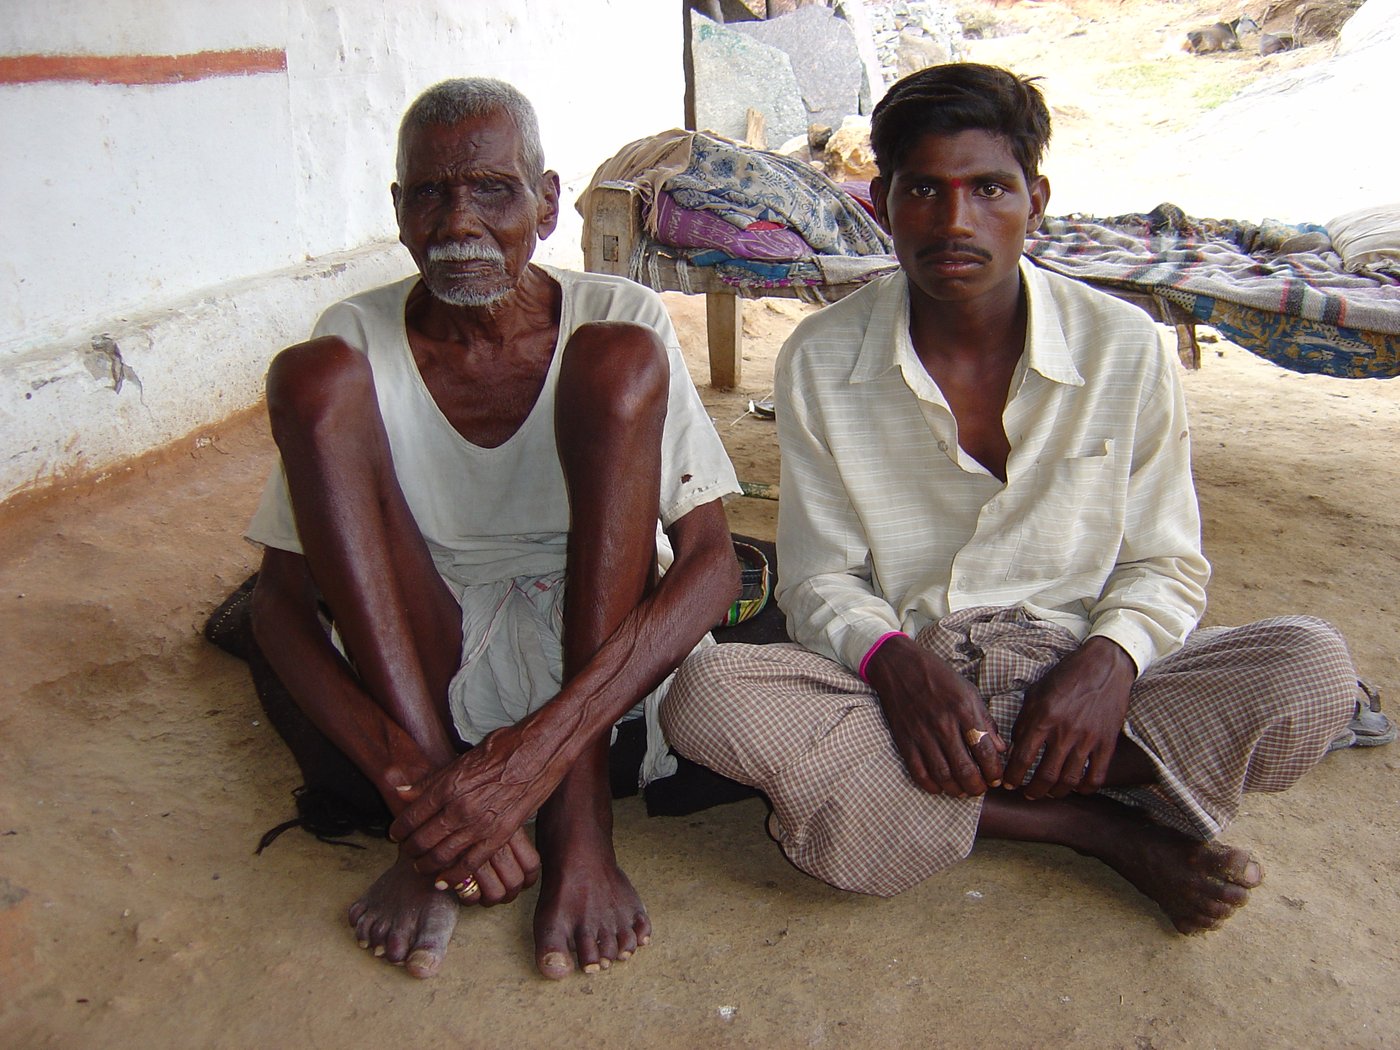 Kathulappa with his grandson Narasimhulu. No post-mortem examination was done when his son Chinna Saianna took his own life in December, 2003. They could not afford it